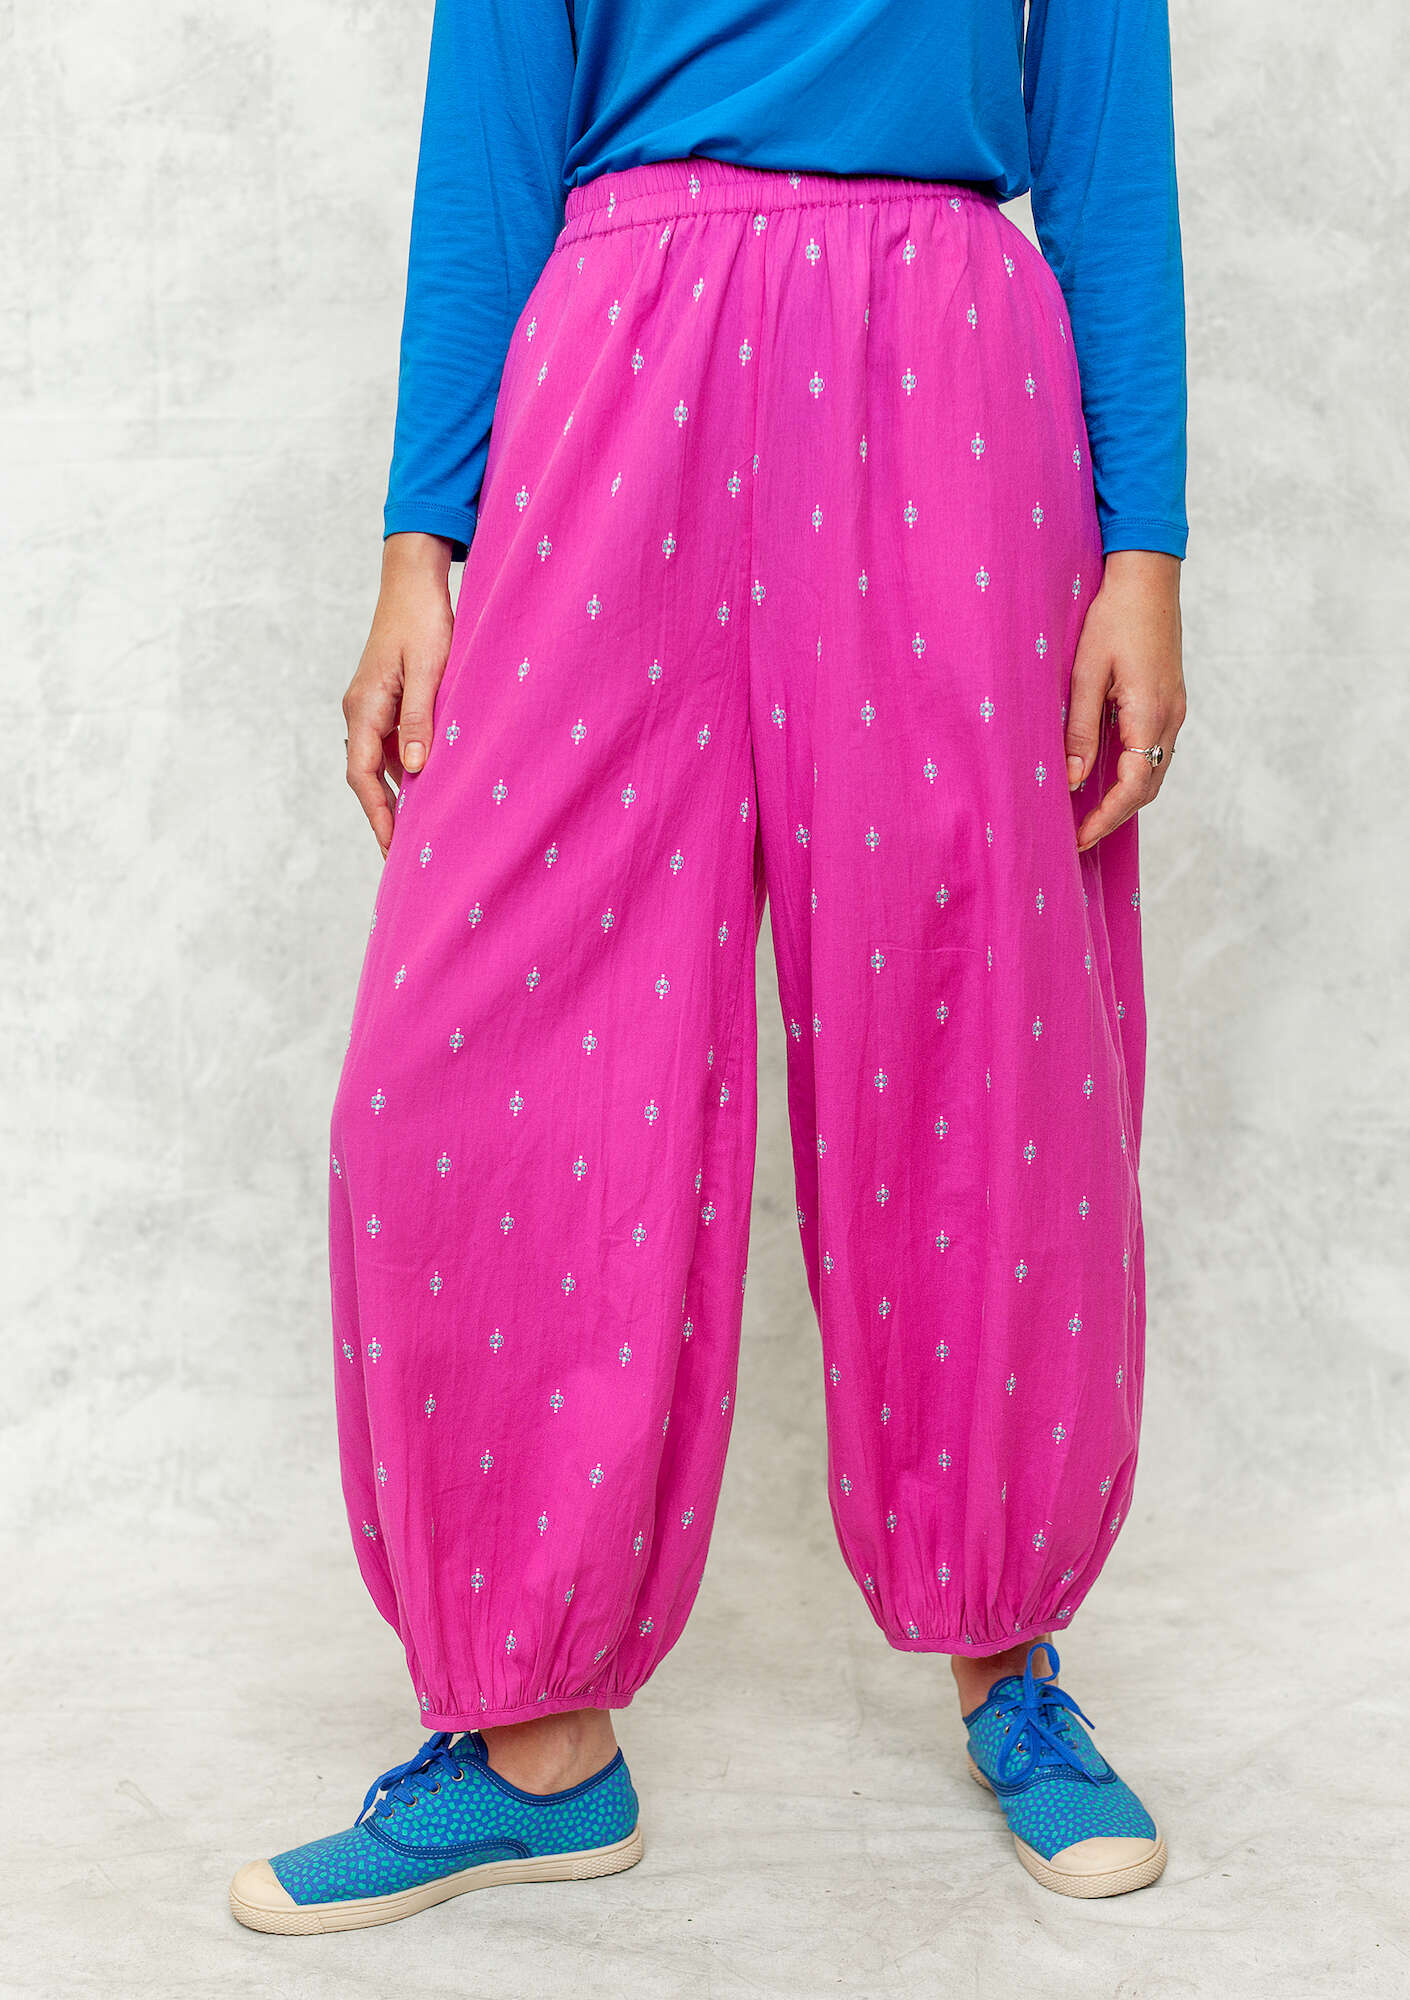 Woven patterned “Signe” pants in organic cotton wild rose